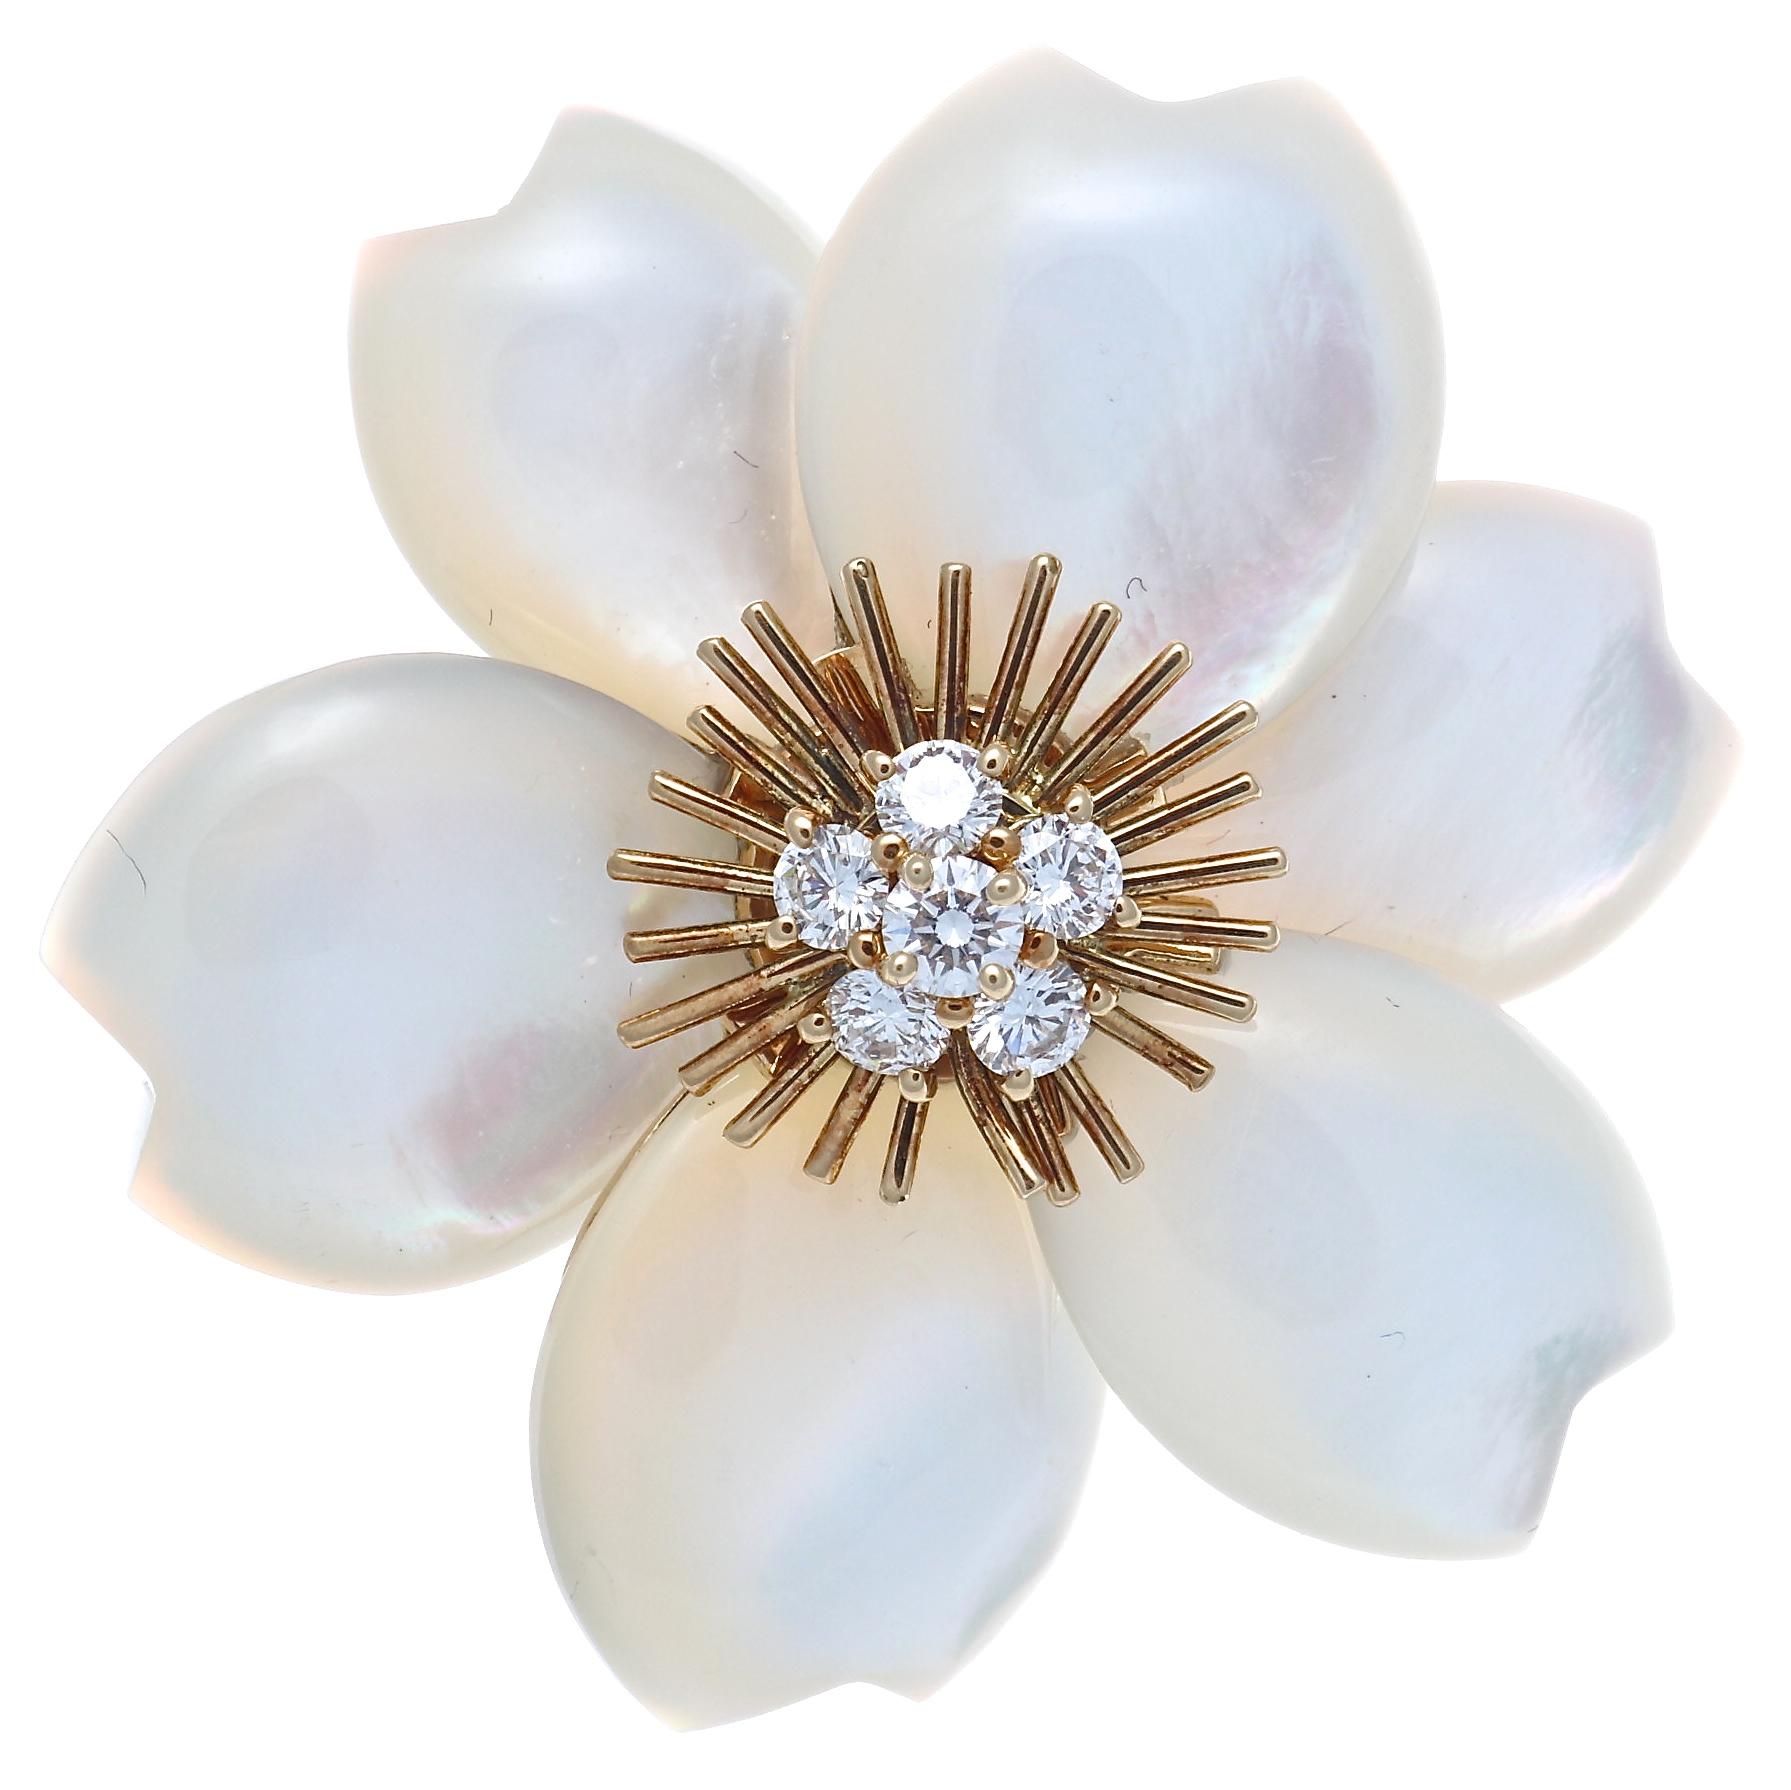 Spectacular mother of pearl flower earrings by Van Cleef & Arpels. Featuring exquisitely carved mother of pearl petals with diamonds in the center. The 10 round brilliant diamonds are bright white D-F color and VVS+ clarity. The earring is 1 1/2